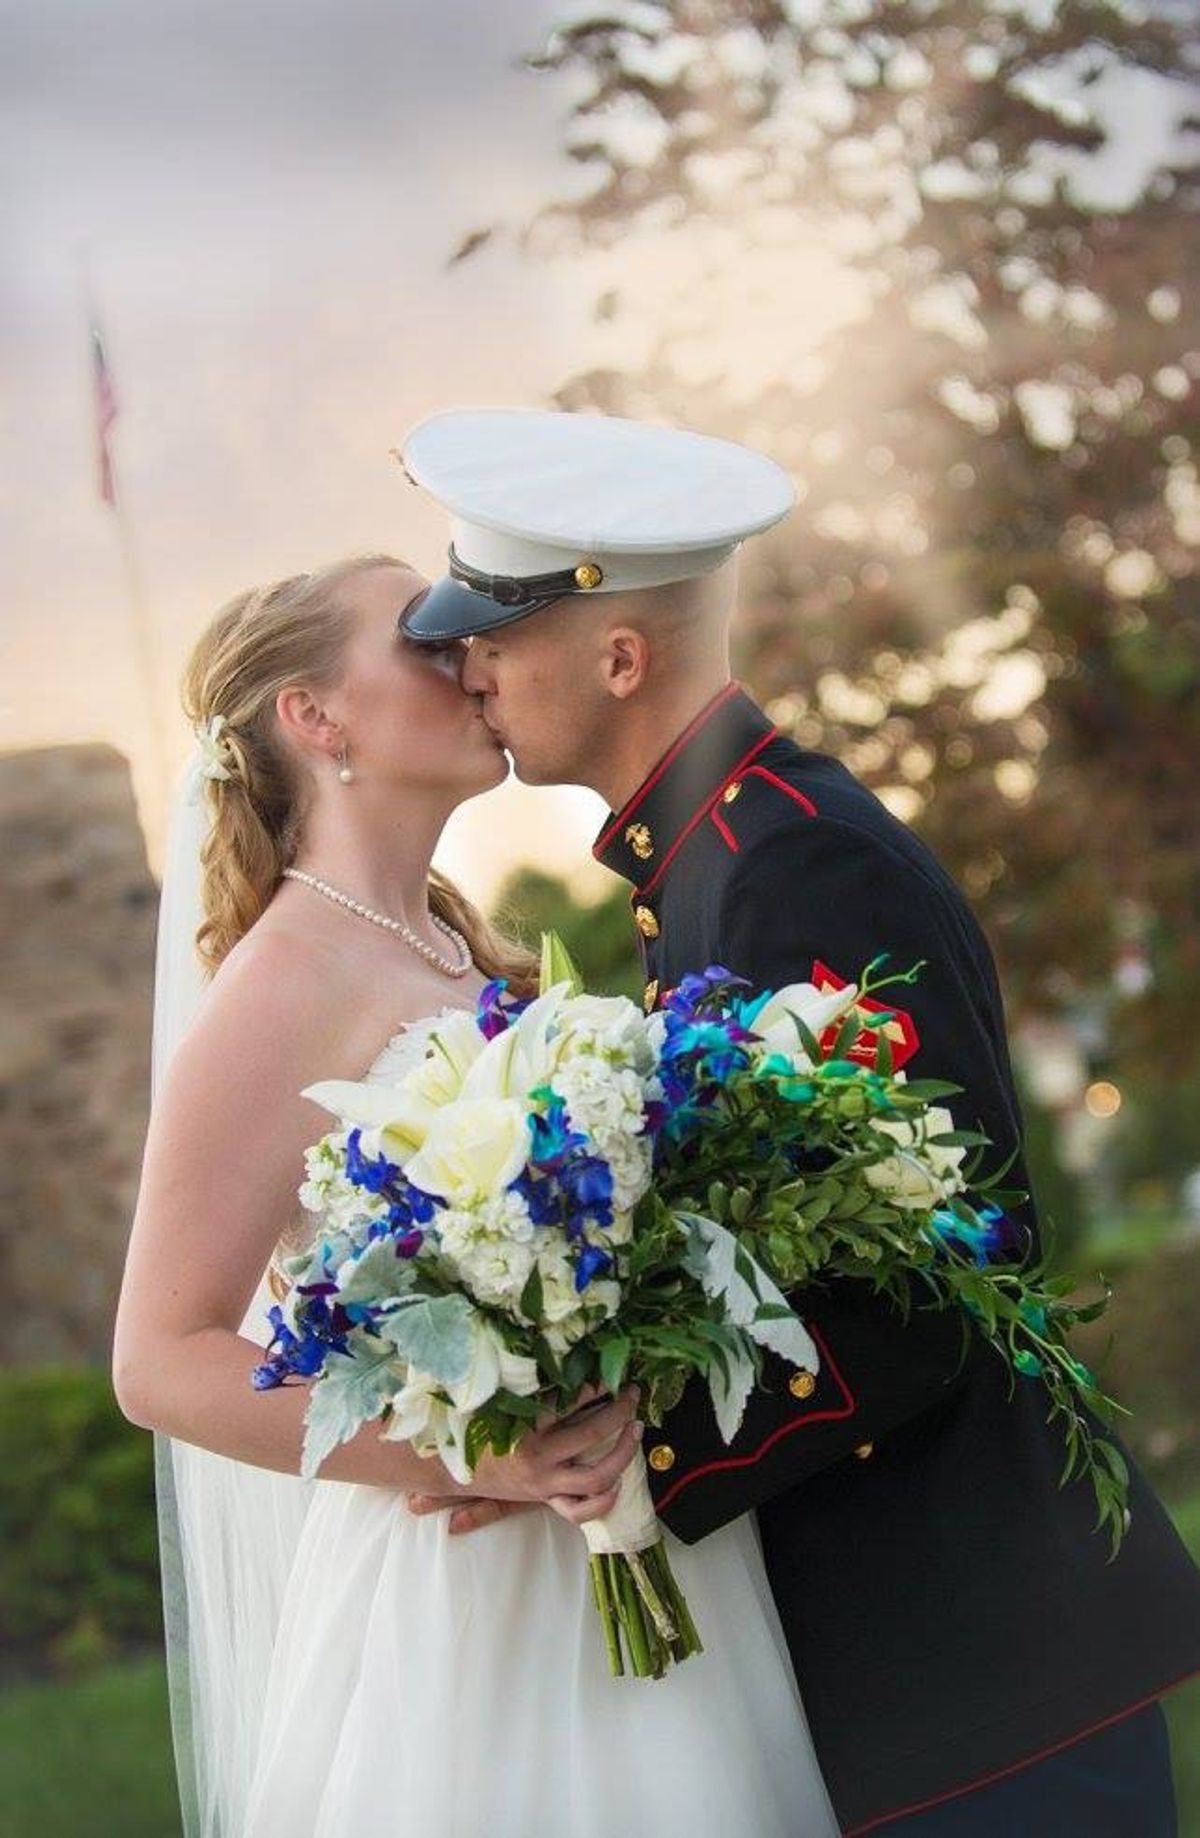 An Open Letter To Military Spouses